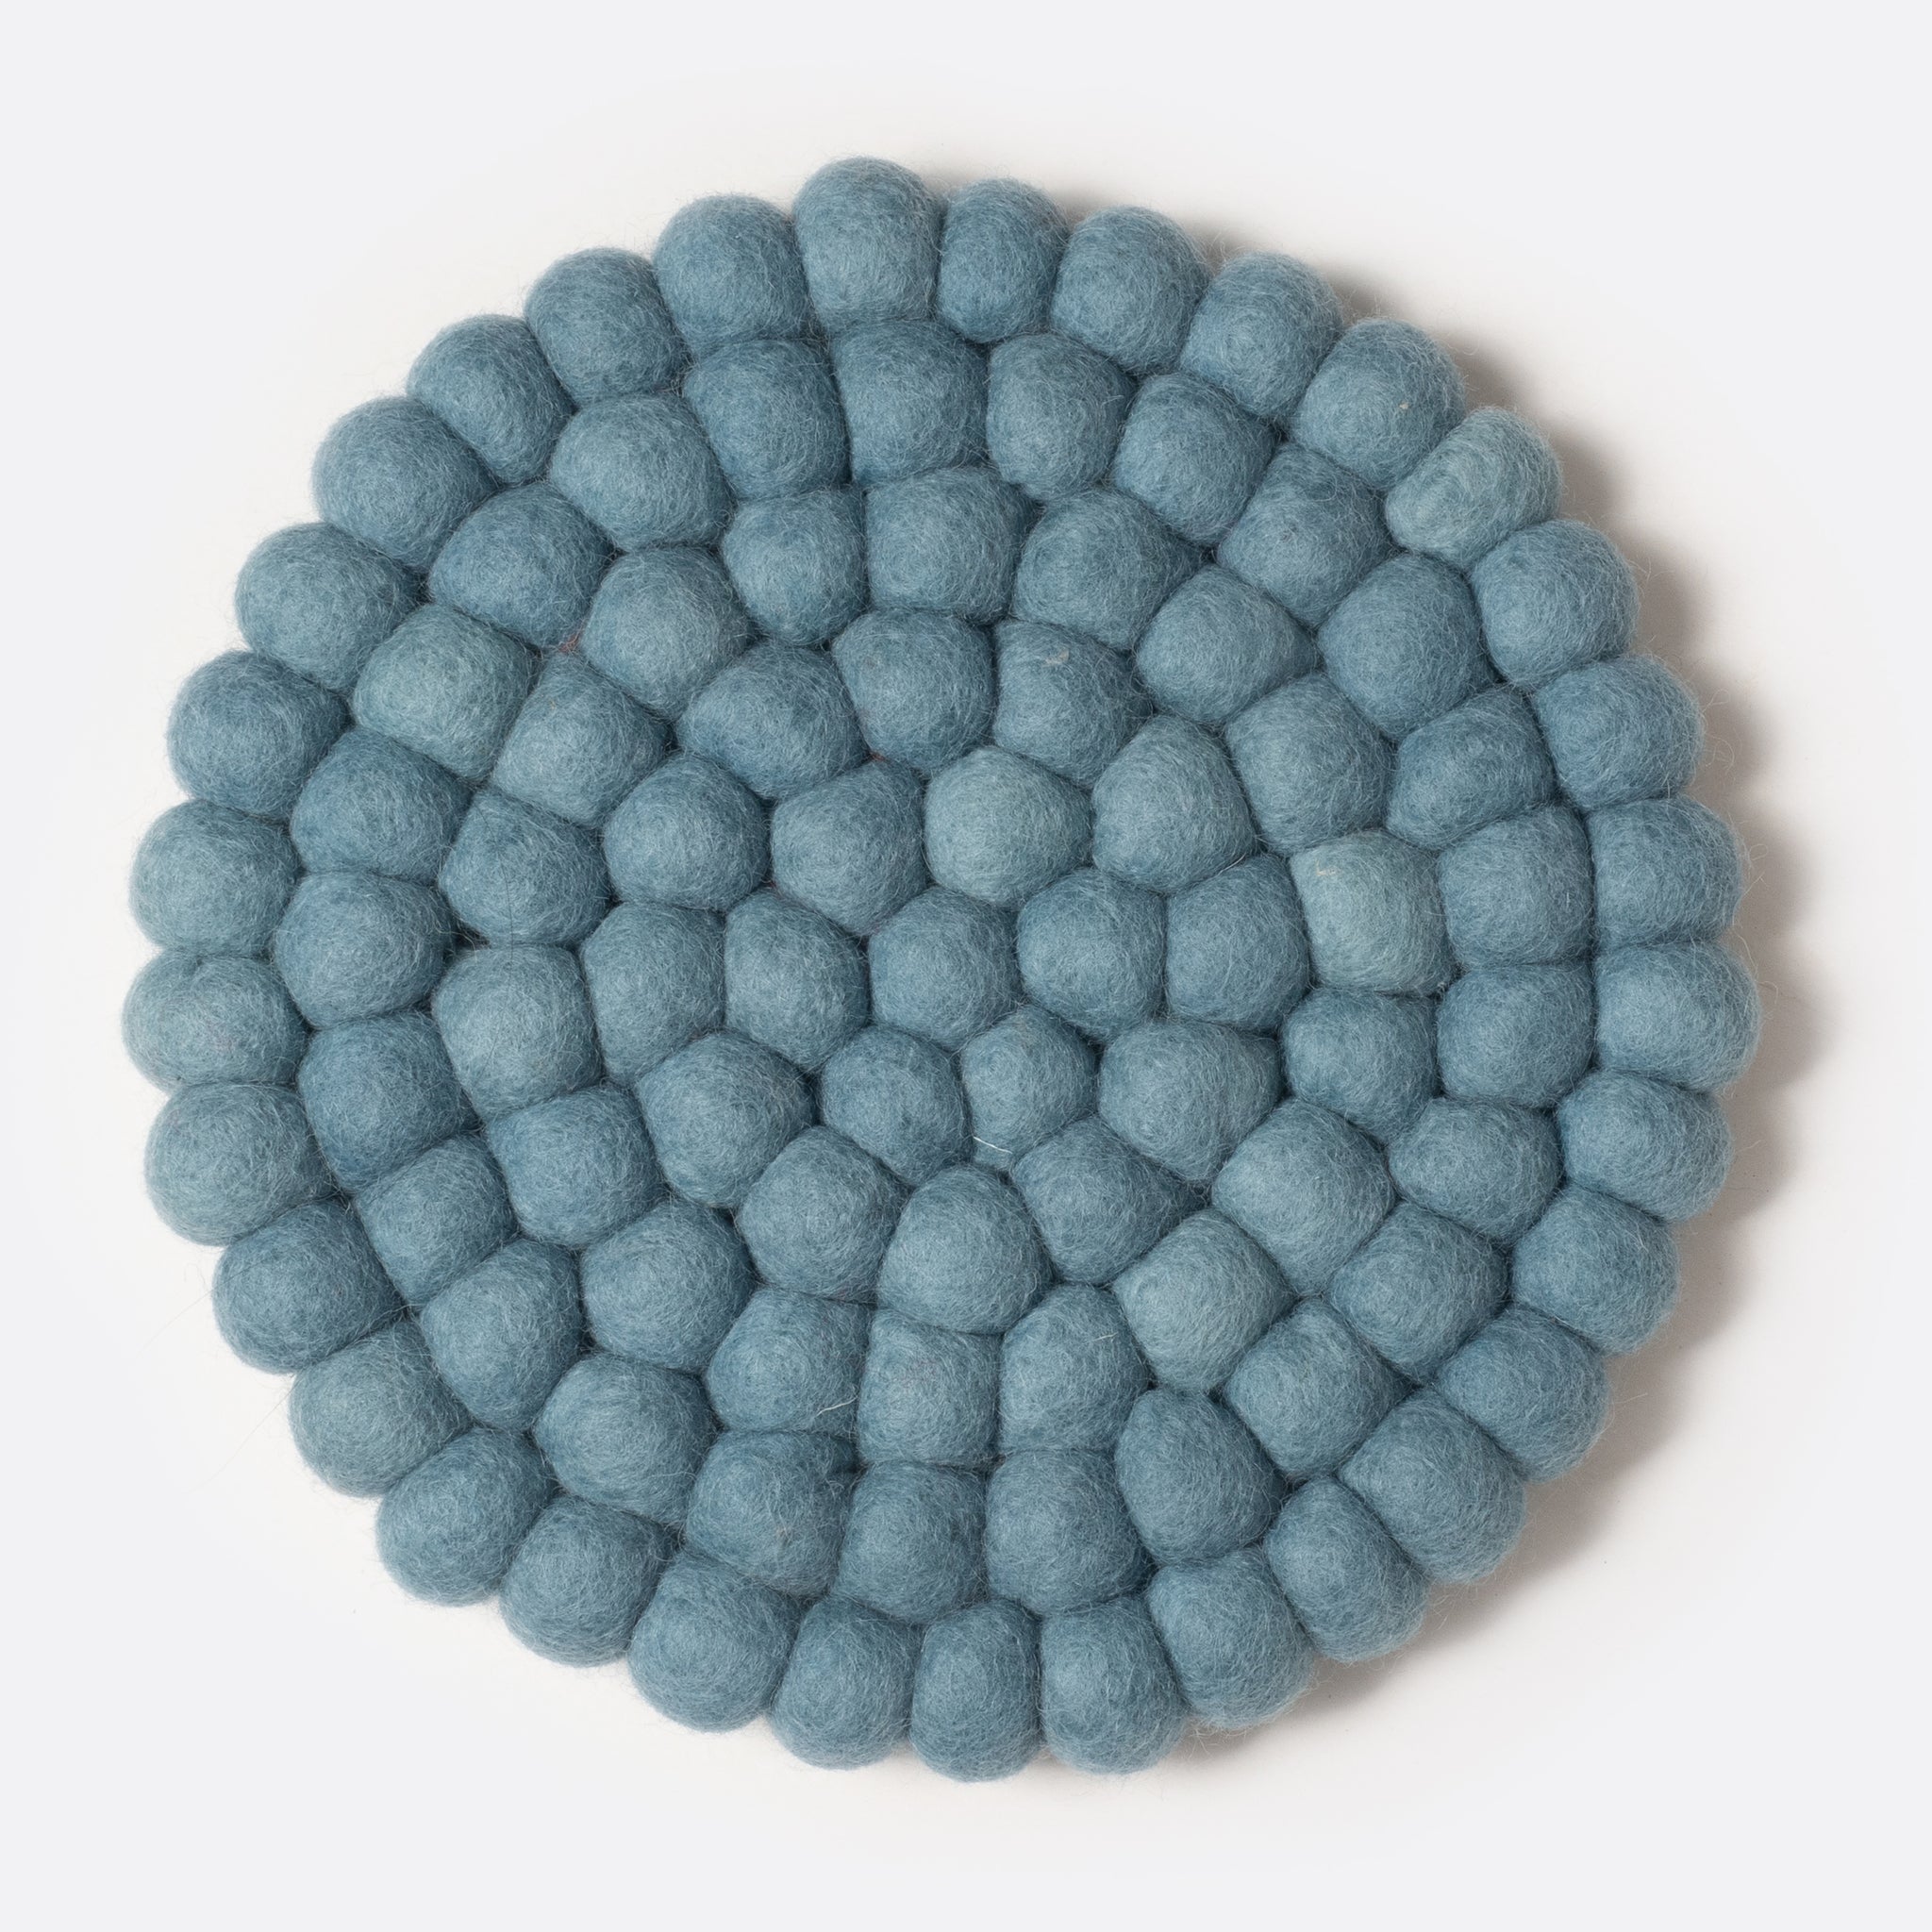 Round felt coaster which is made from little felt balls. The color is light blue-grey